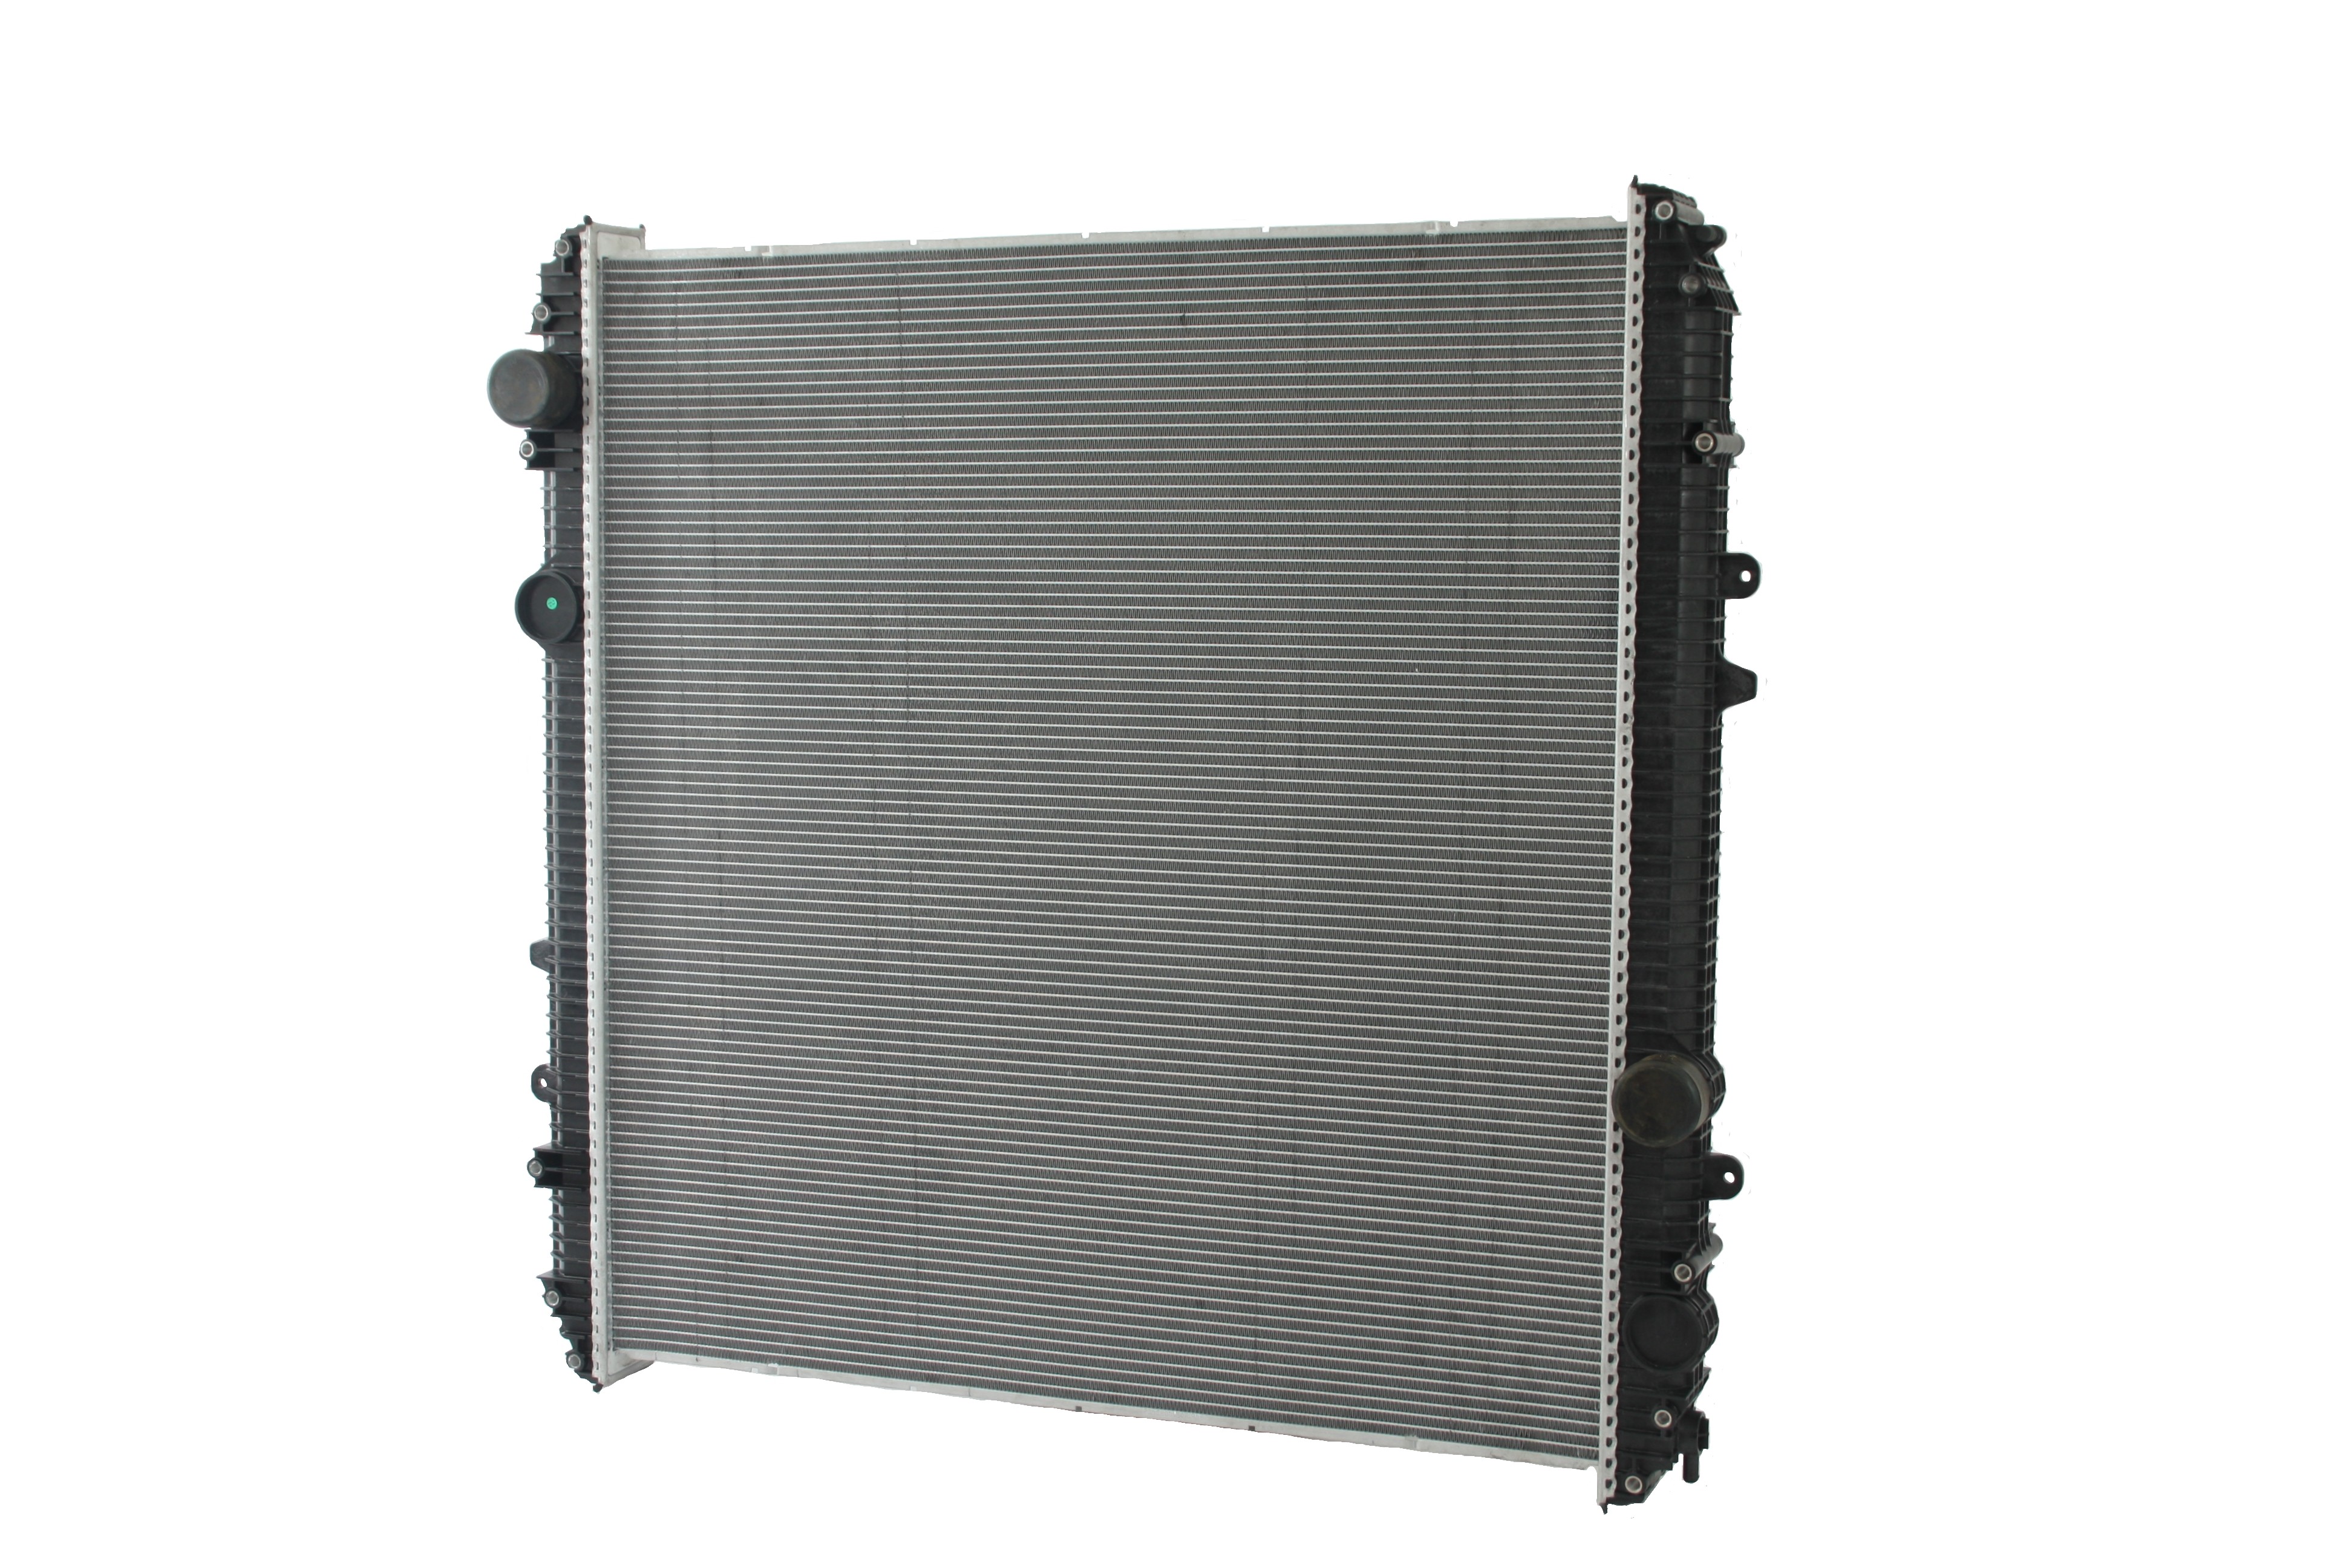 Freightliner Sterling FLD Century Classic Radiator Front View. 